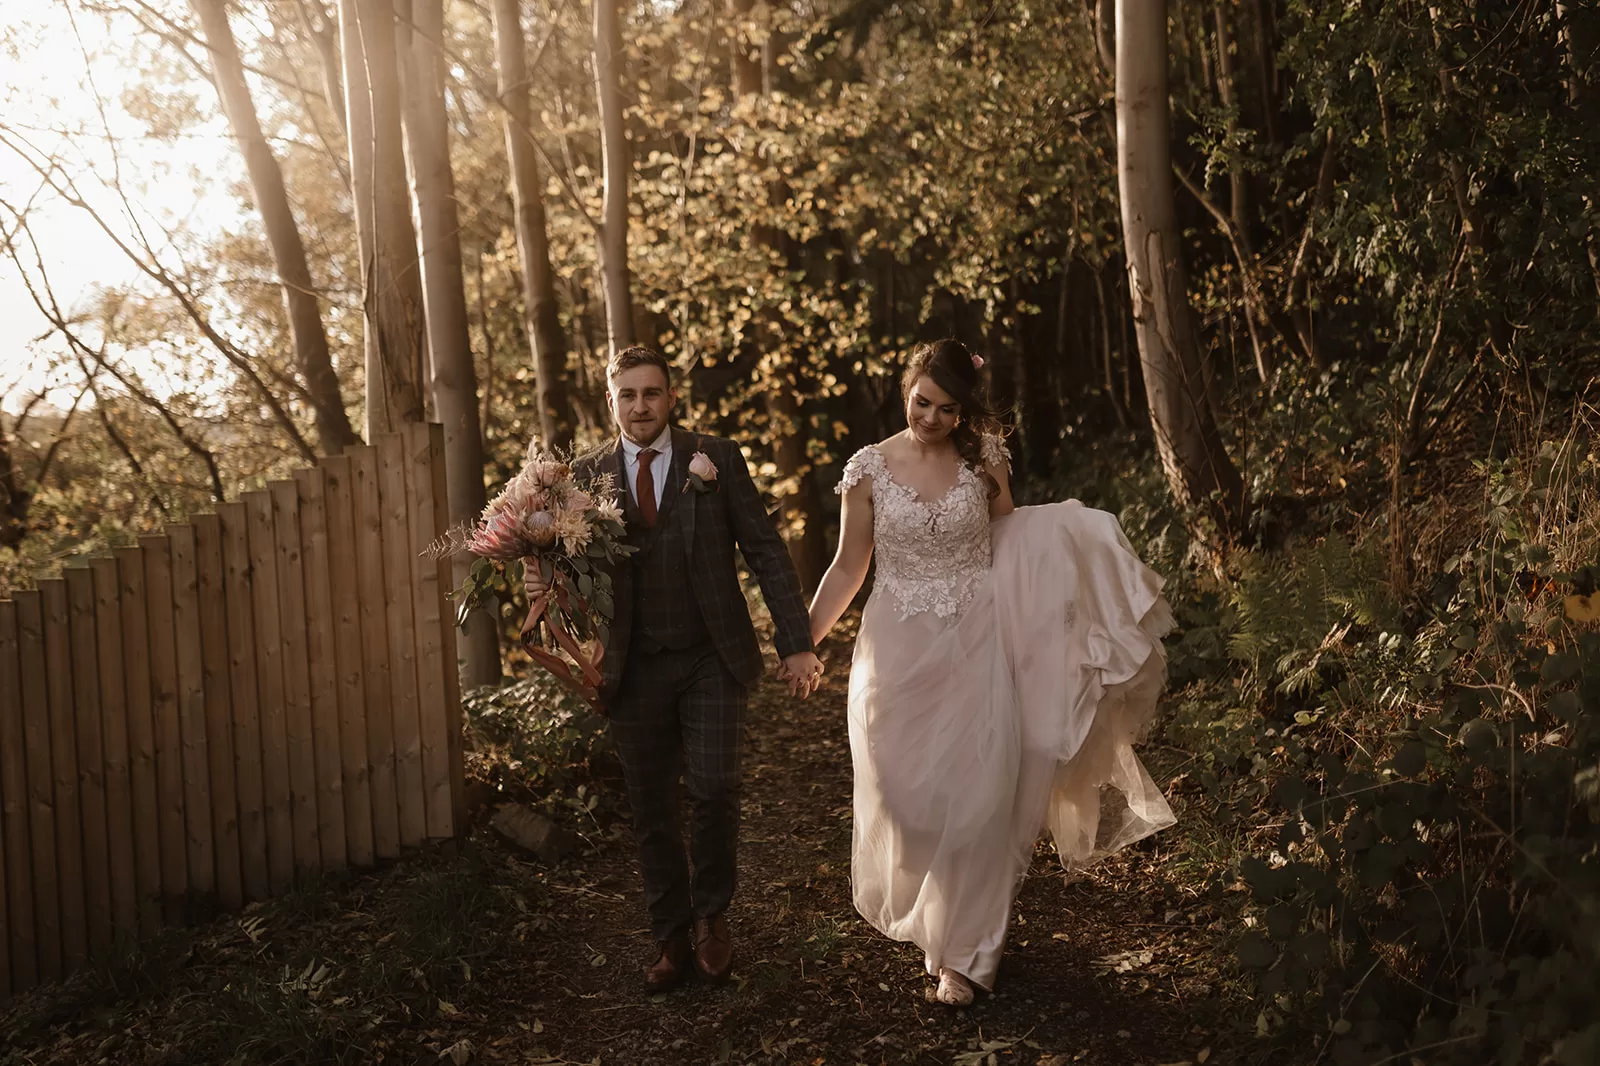 Super relaxed wedding photography at Trevor Hall | Wales Wedding Photographer